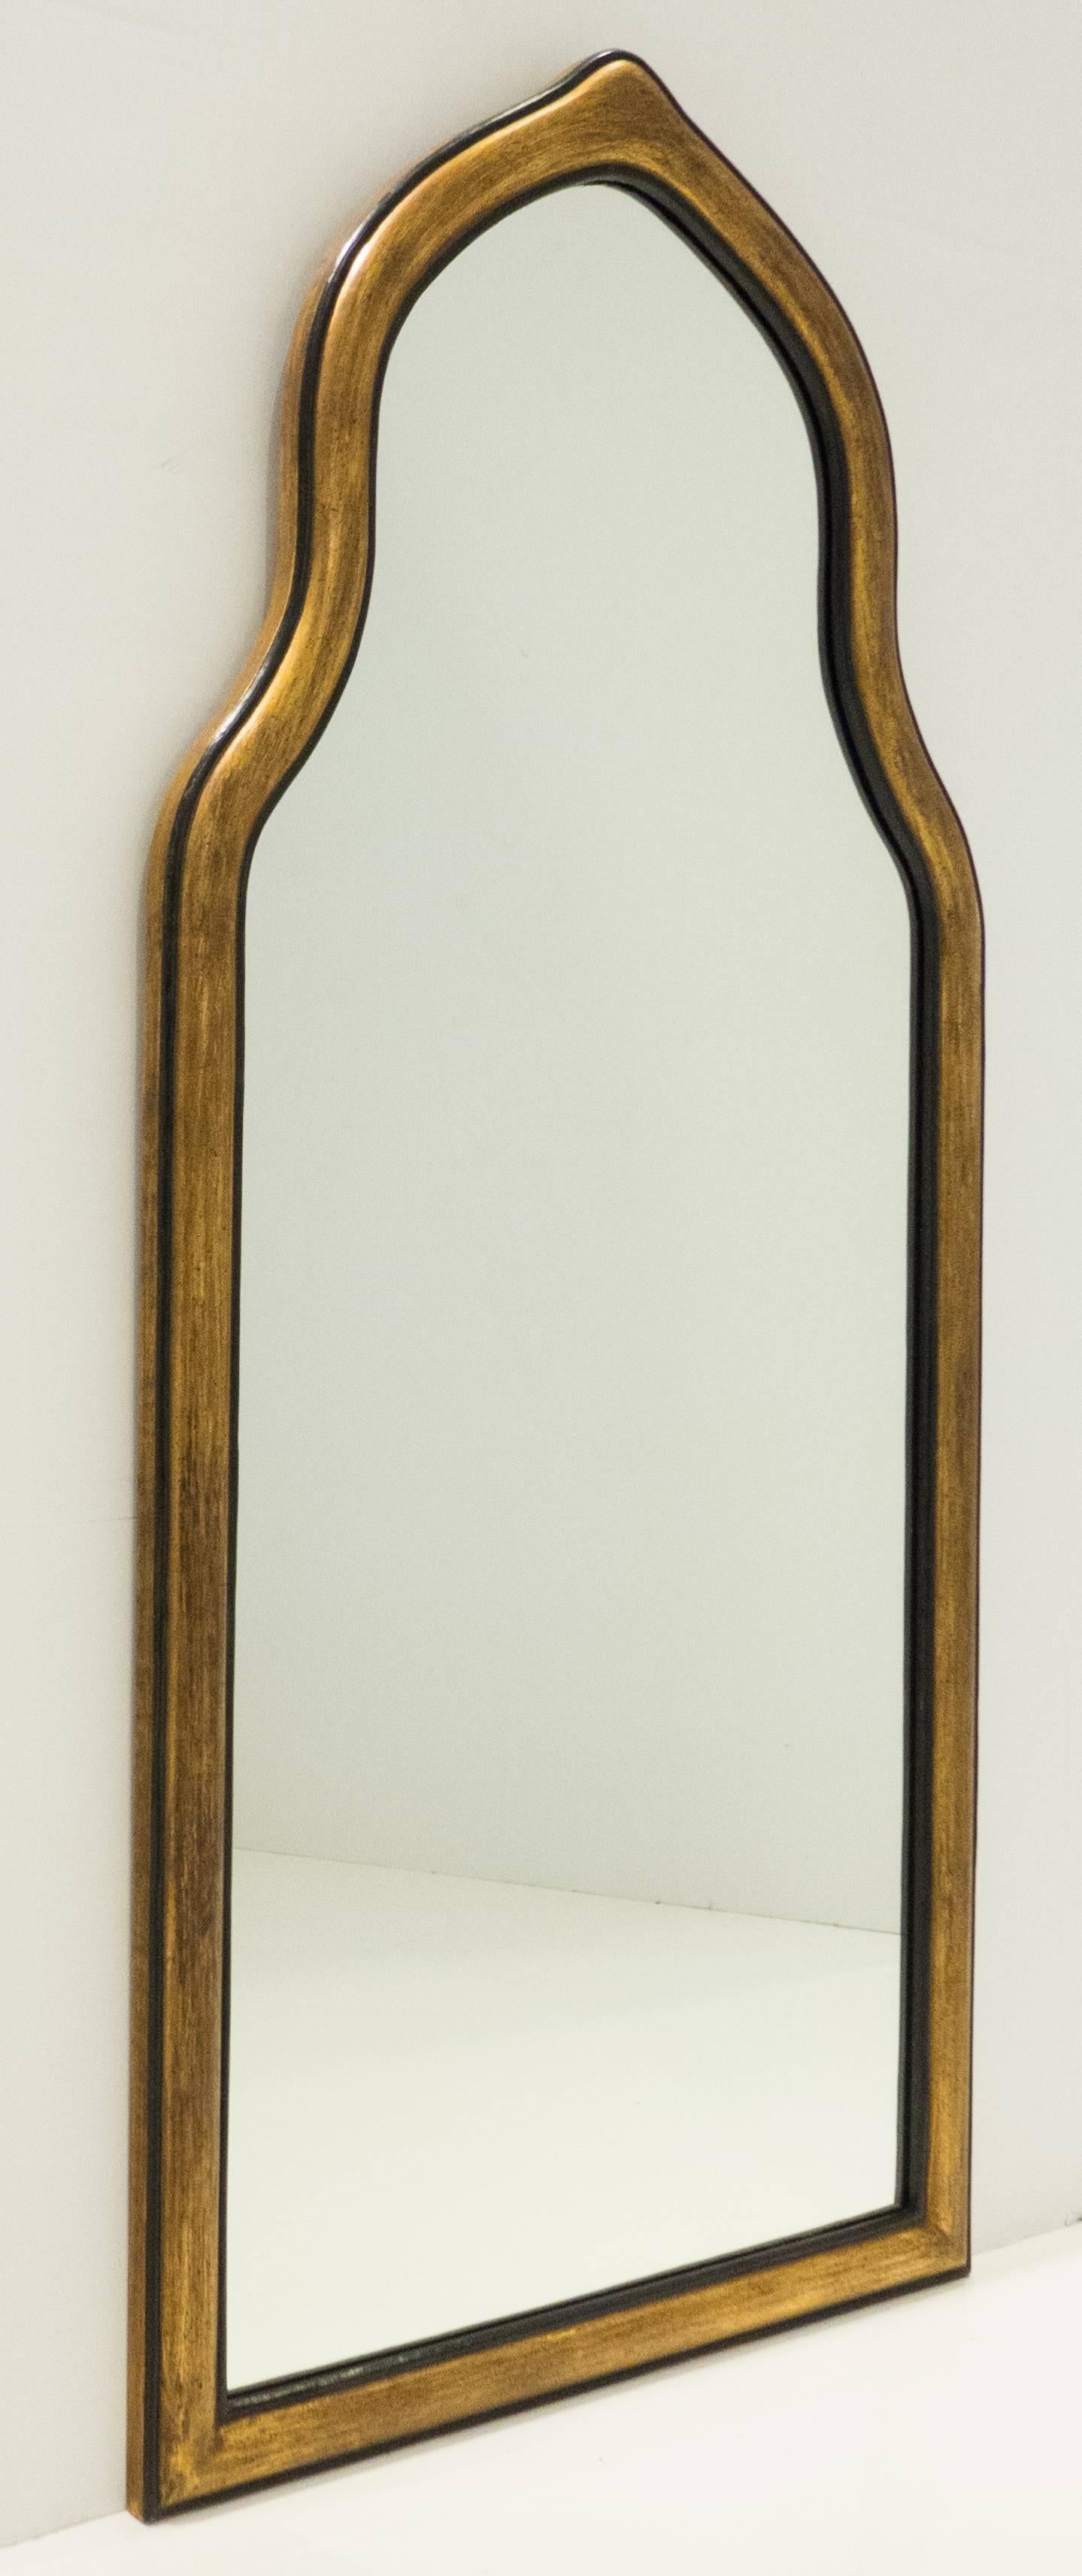 Handcrafted pier or wall mirror with a Moorish arch. Carved wooden frame with patinated gilt gesso and paint. Made by Friedman Brothers, the venerable New York City firm, circa 1950s. 52 inches tall. In excellent condition, still with the original